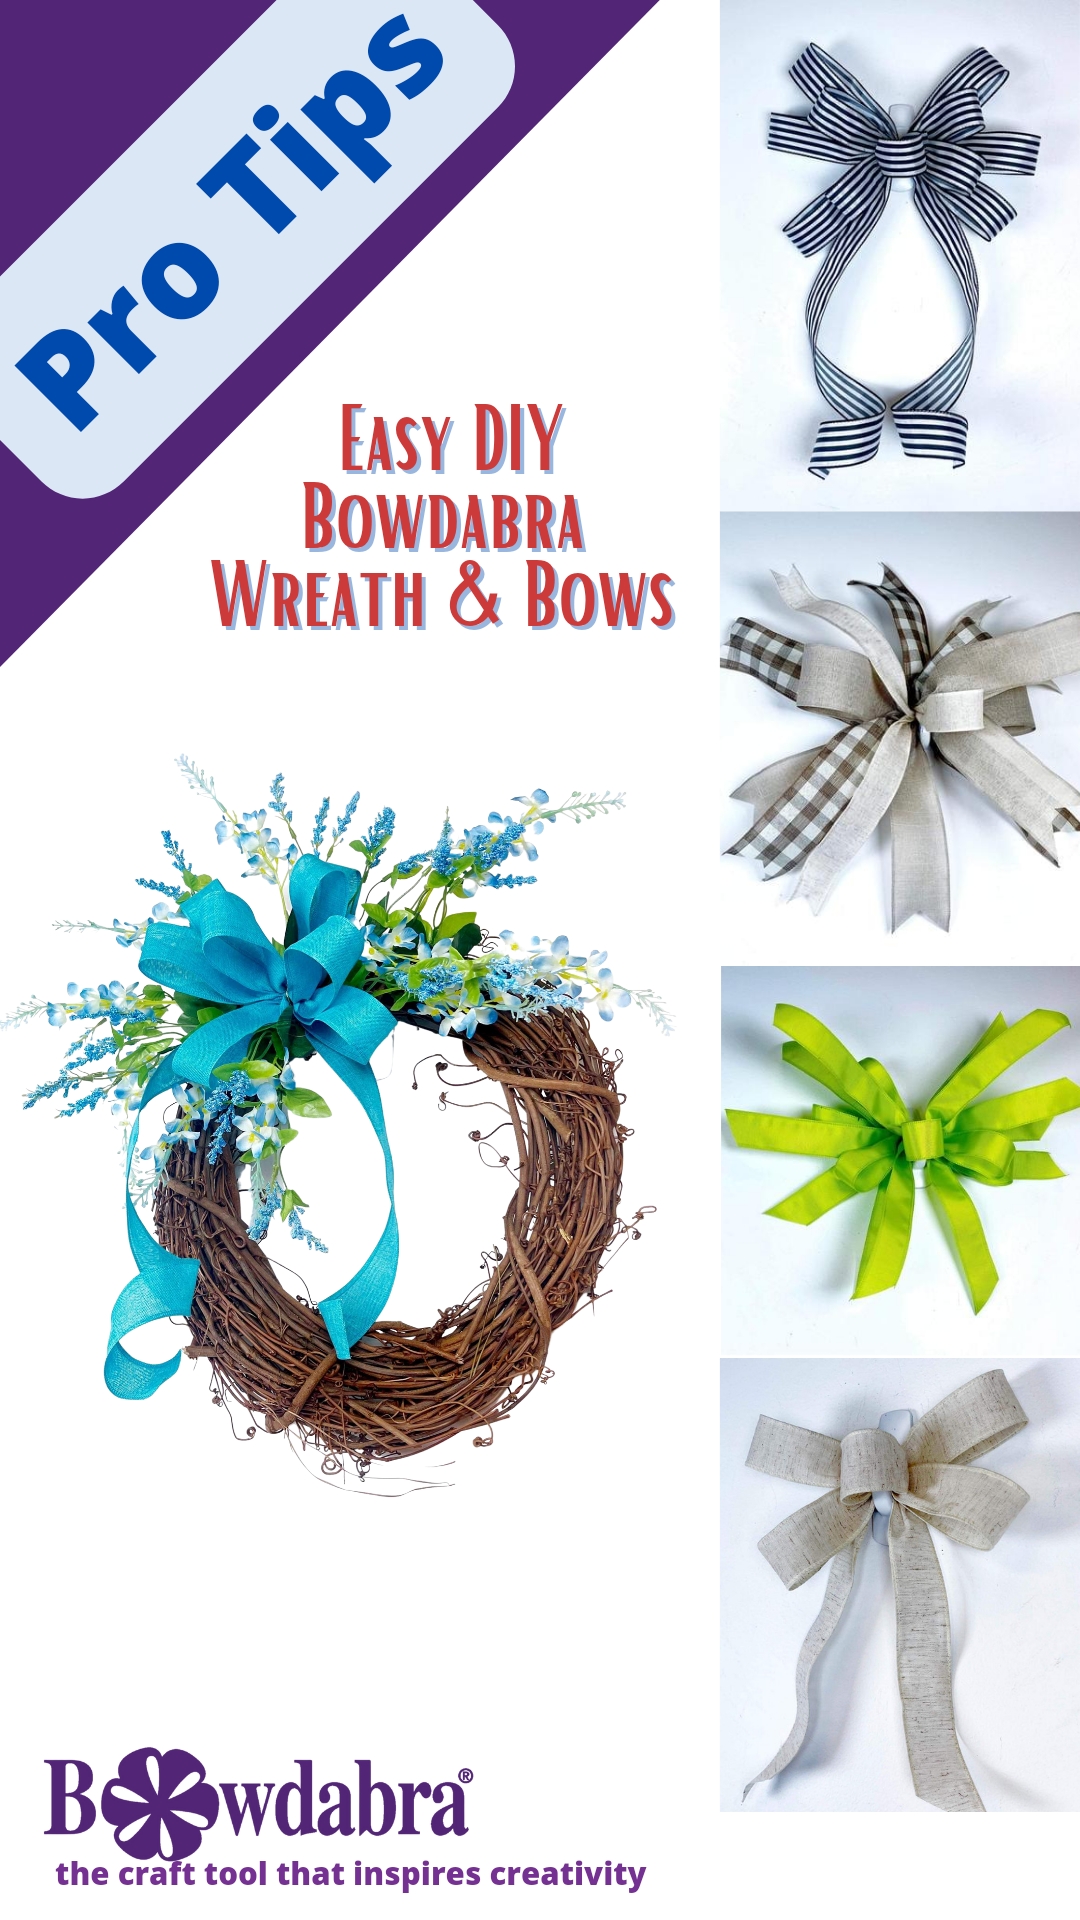 How to Make a Bow with Bowdabra | Bow Making Kit